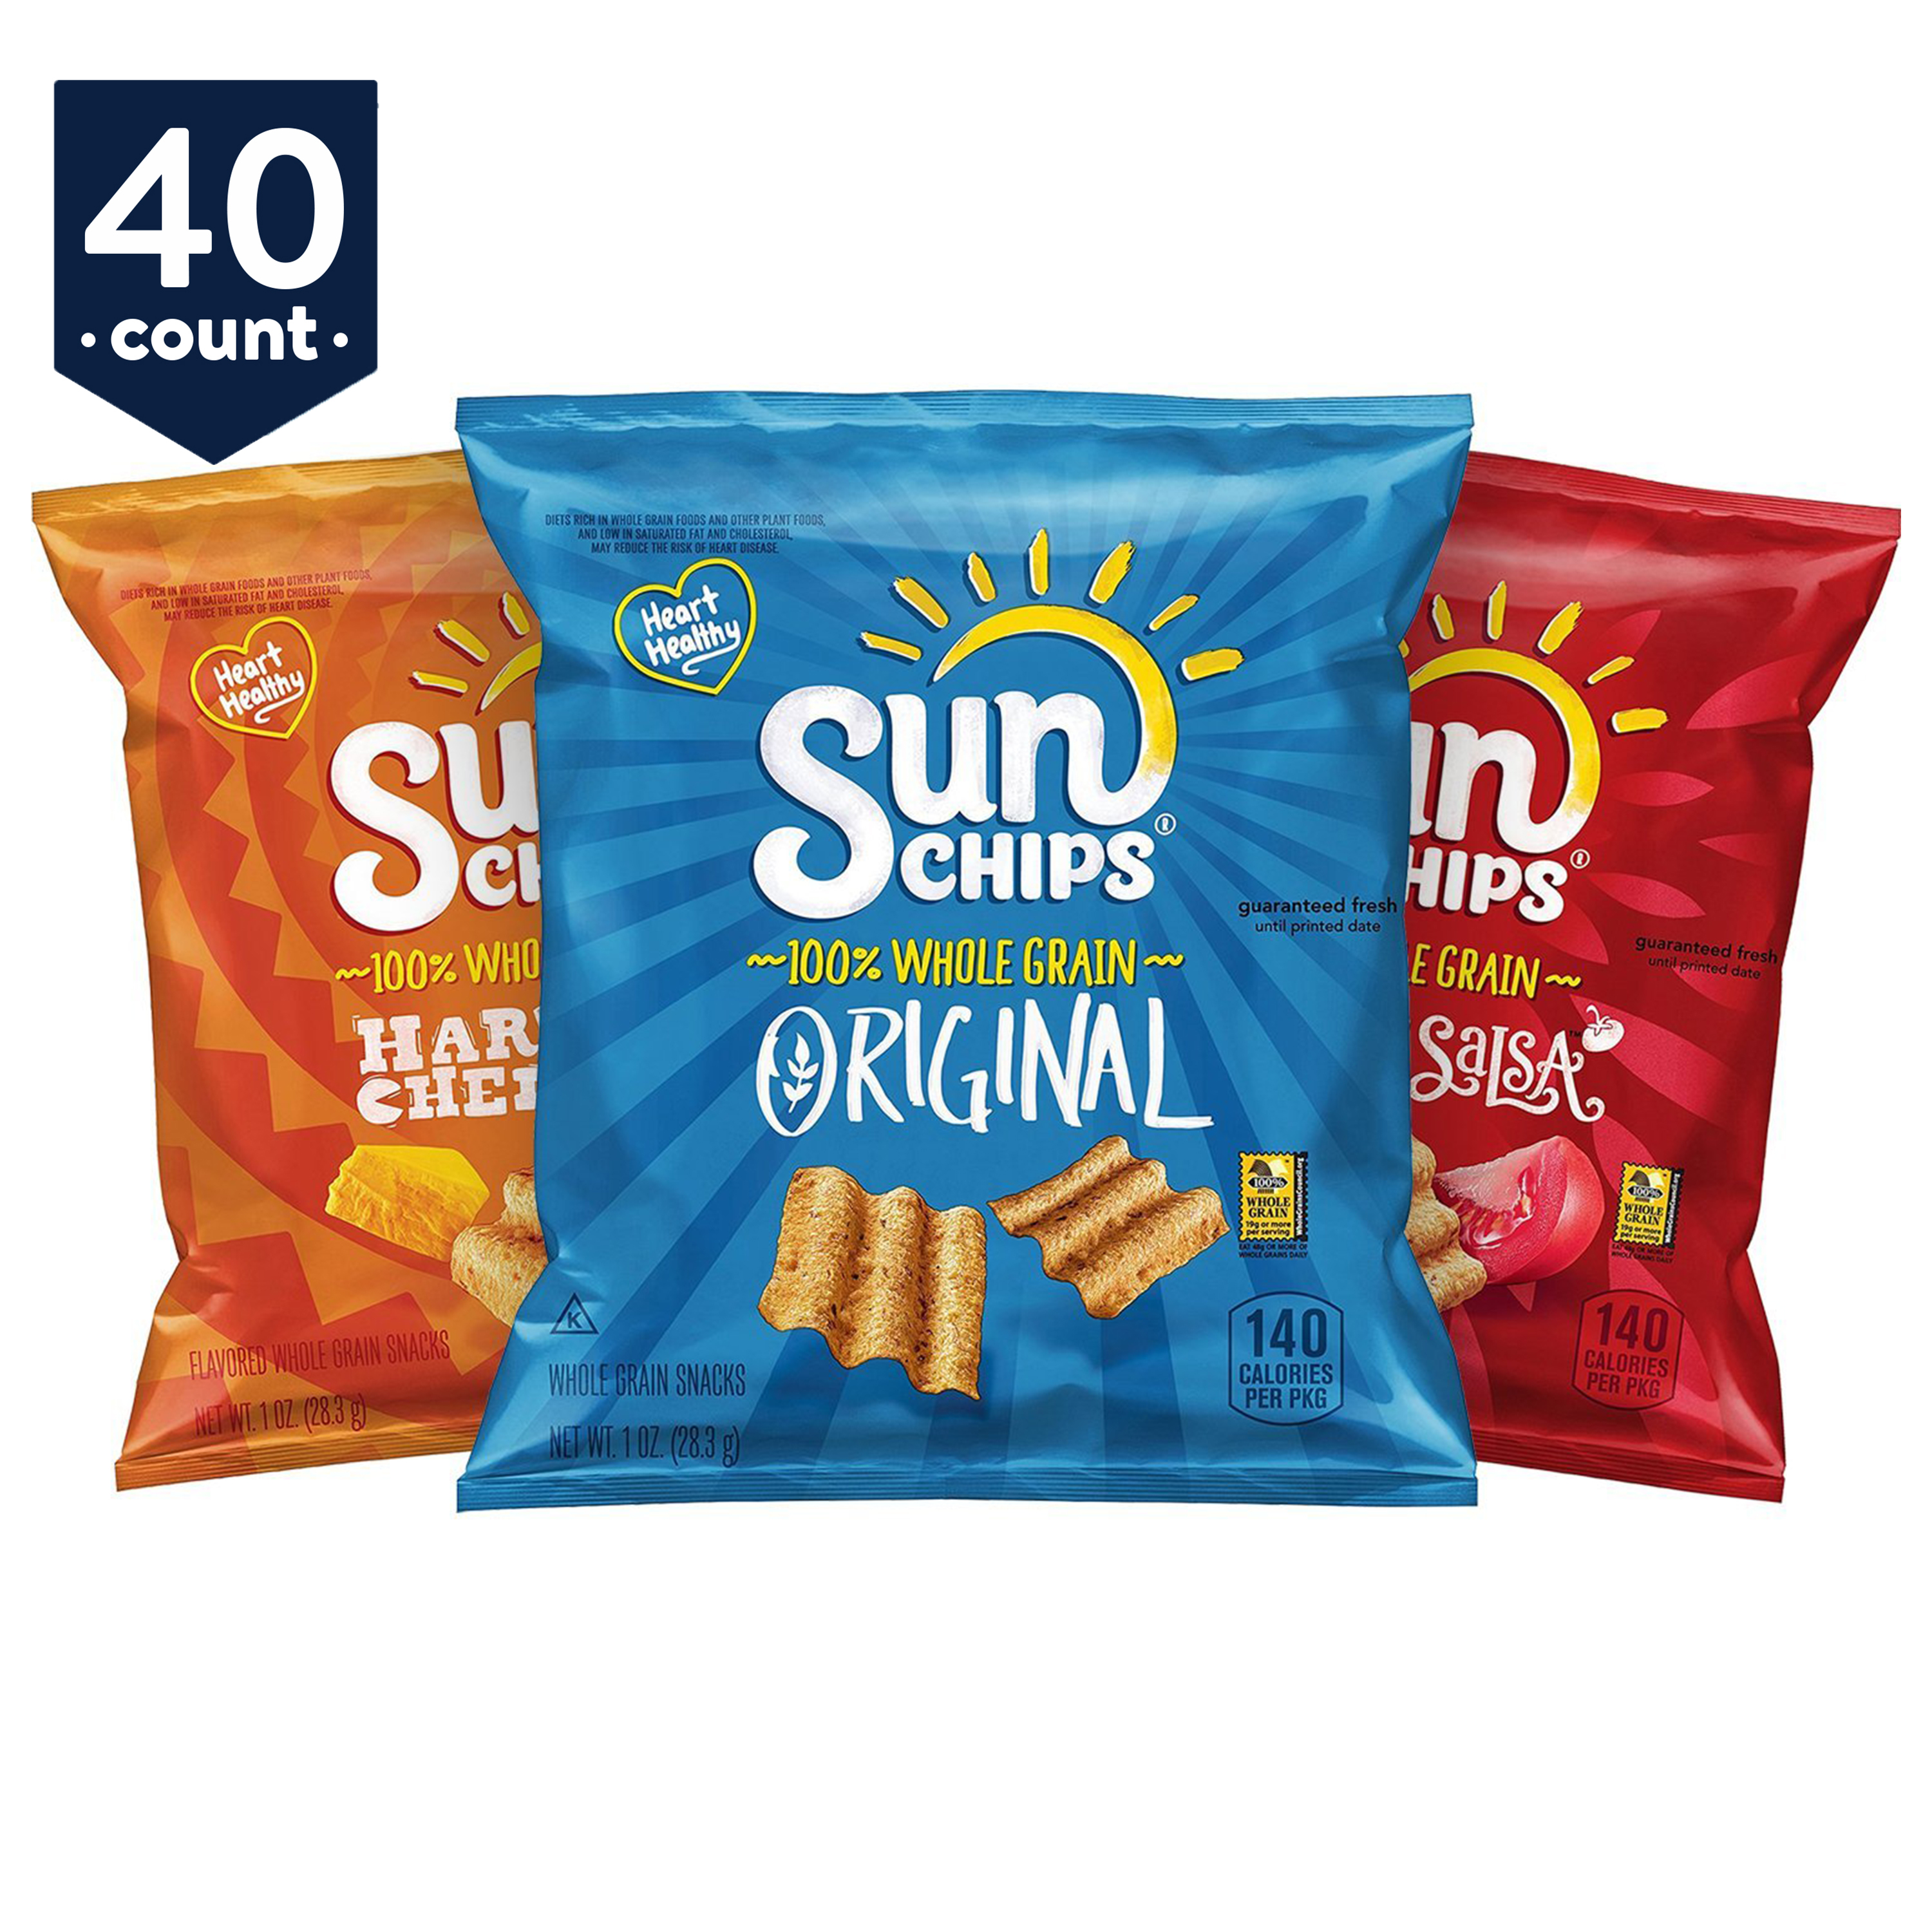 SunChips Multigrain Variety Pack Snack Chips, 1 oz Bags, 40 Count Multipack - image 1 of 8